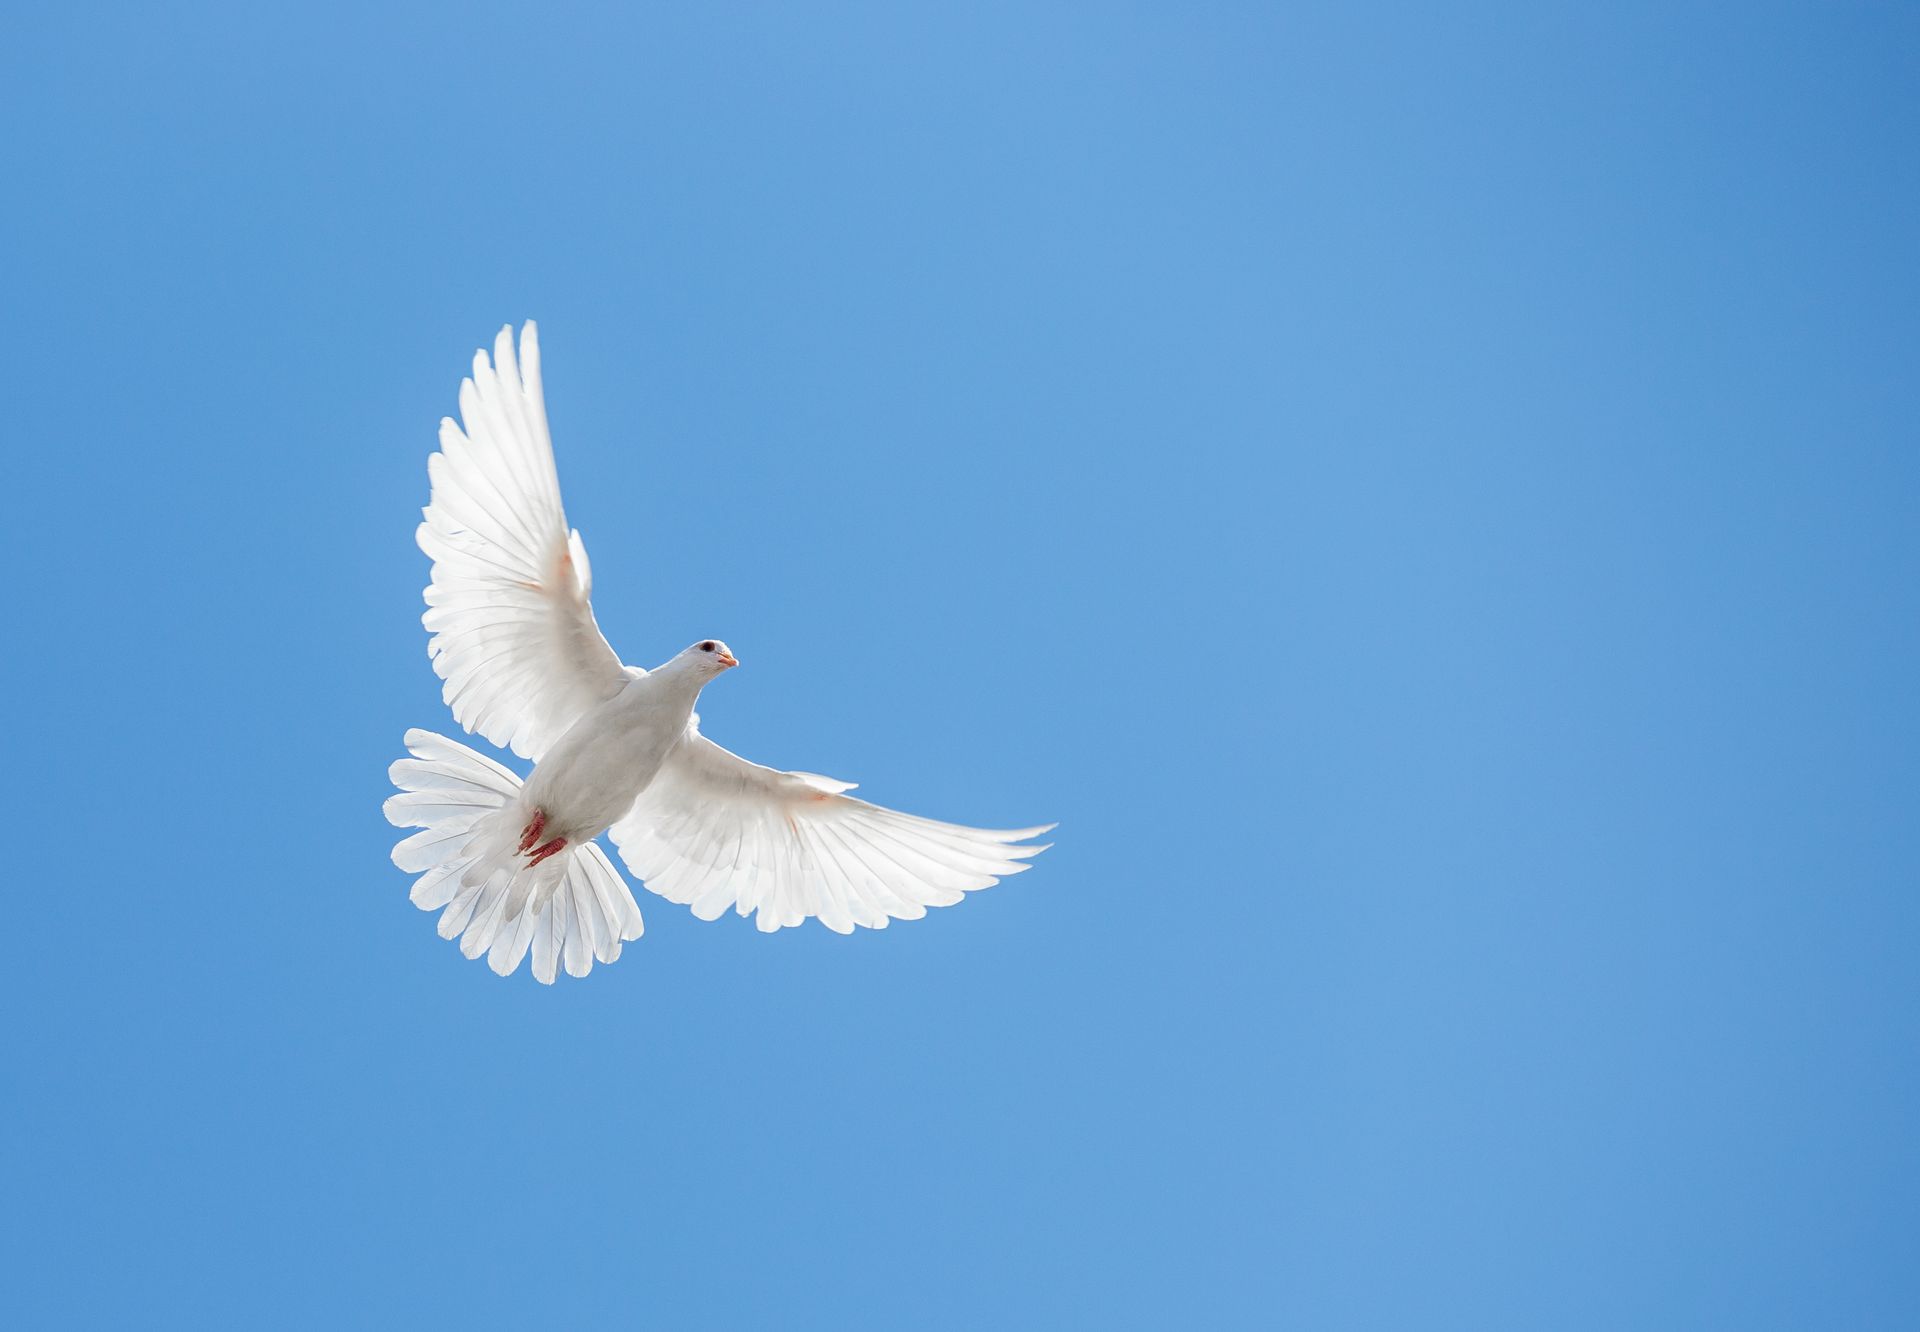 Dove release for funeral services provided by Hayworth Funeral Homes serving Forsyth County in North Carolina